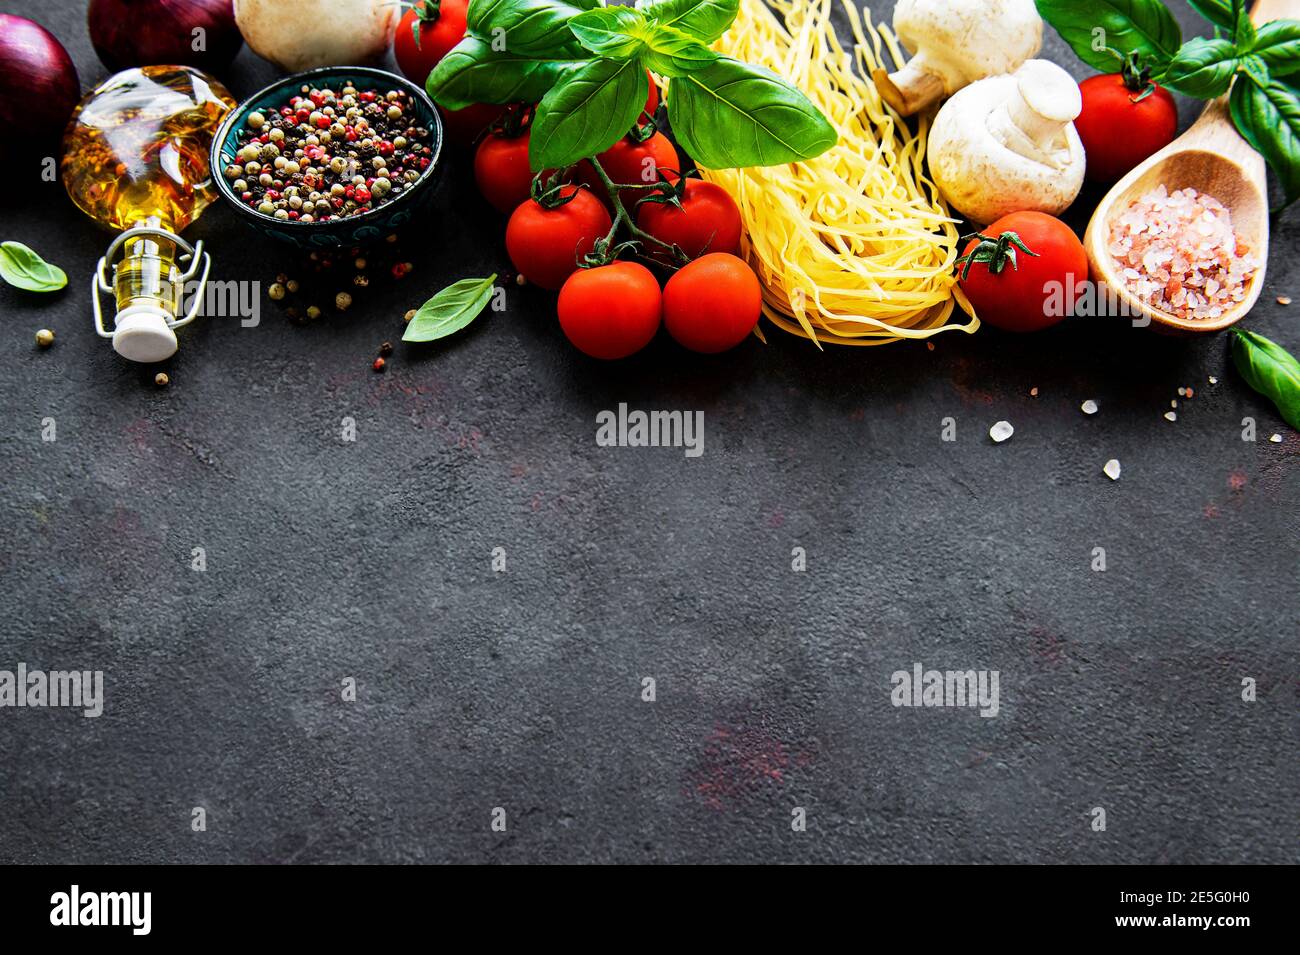 Healthy mediterranean diet, ingredients for Italian meal, spaghetti, tomatoes, basil, olive oil, garlic, peppers on black background Stock Photo